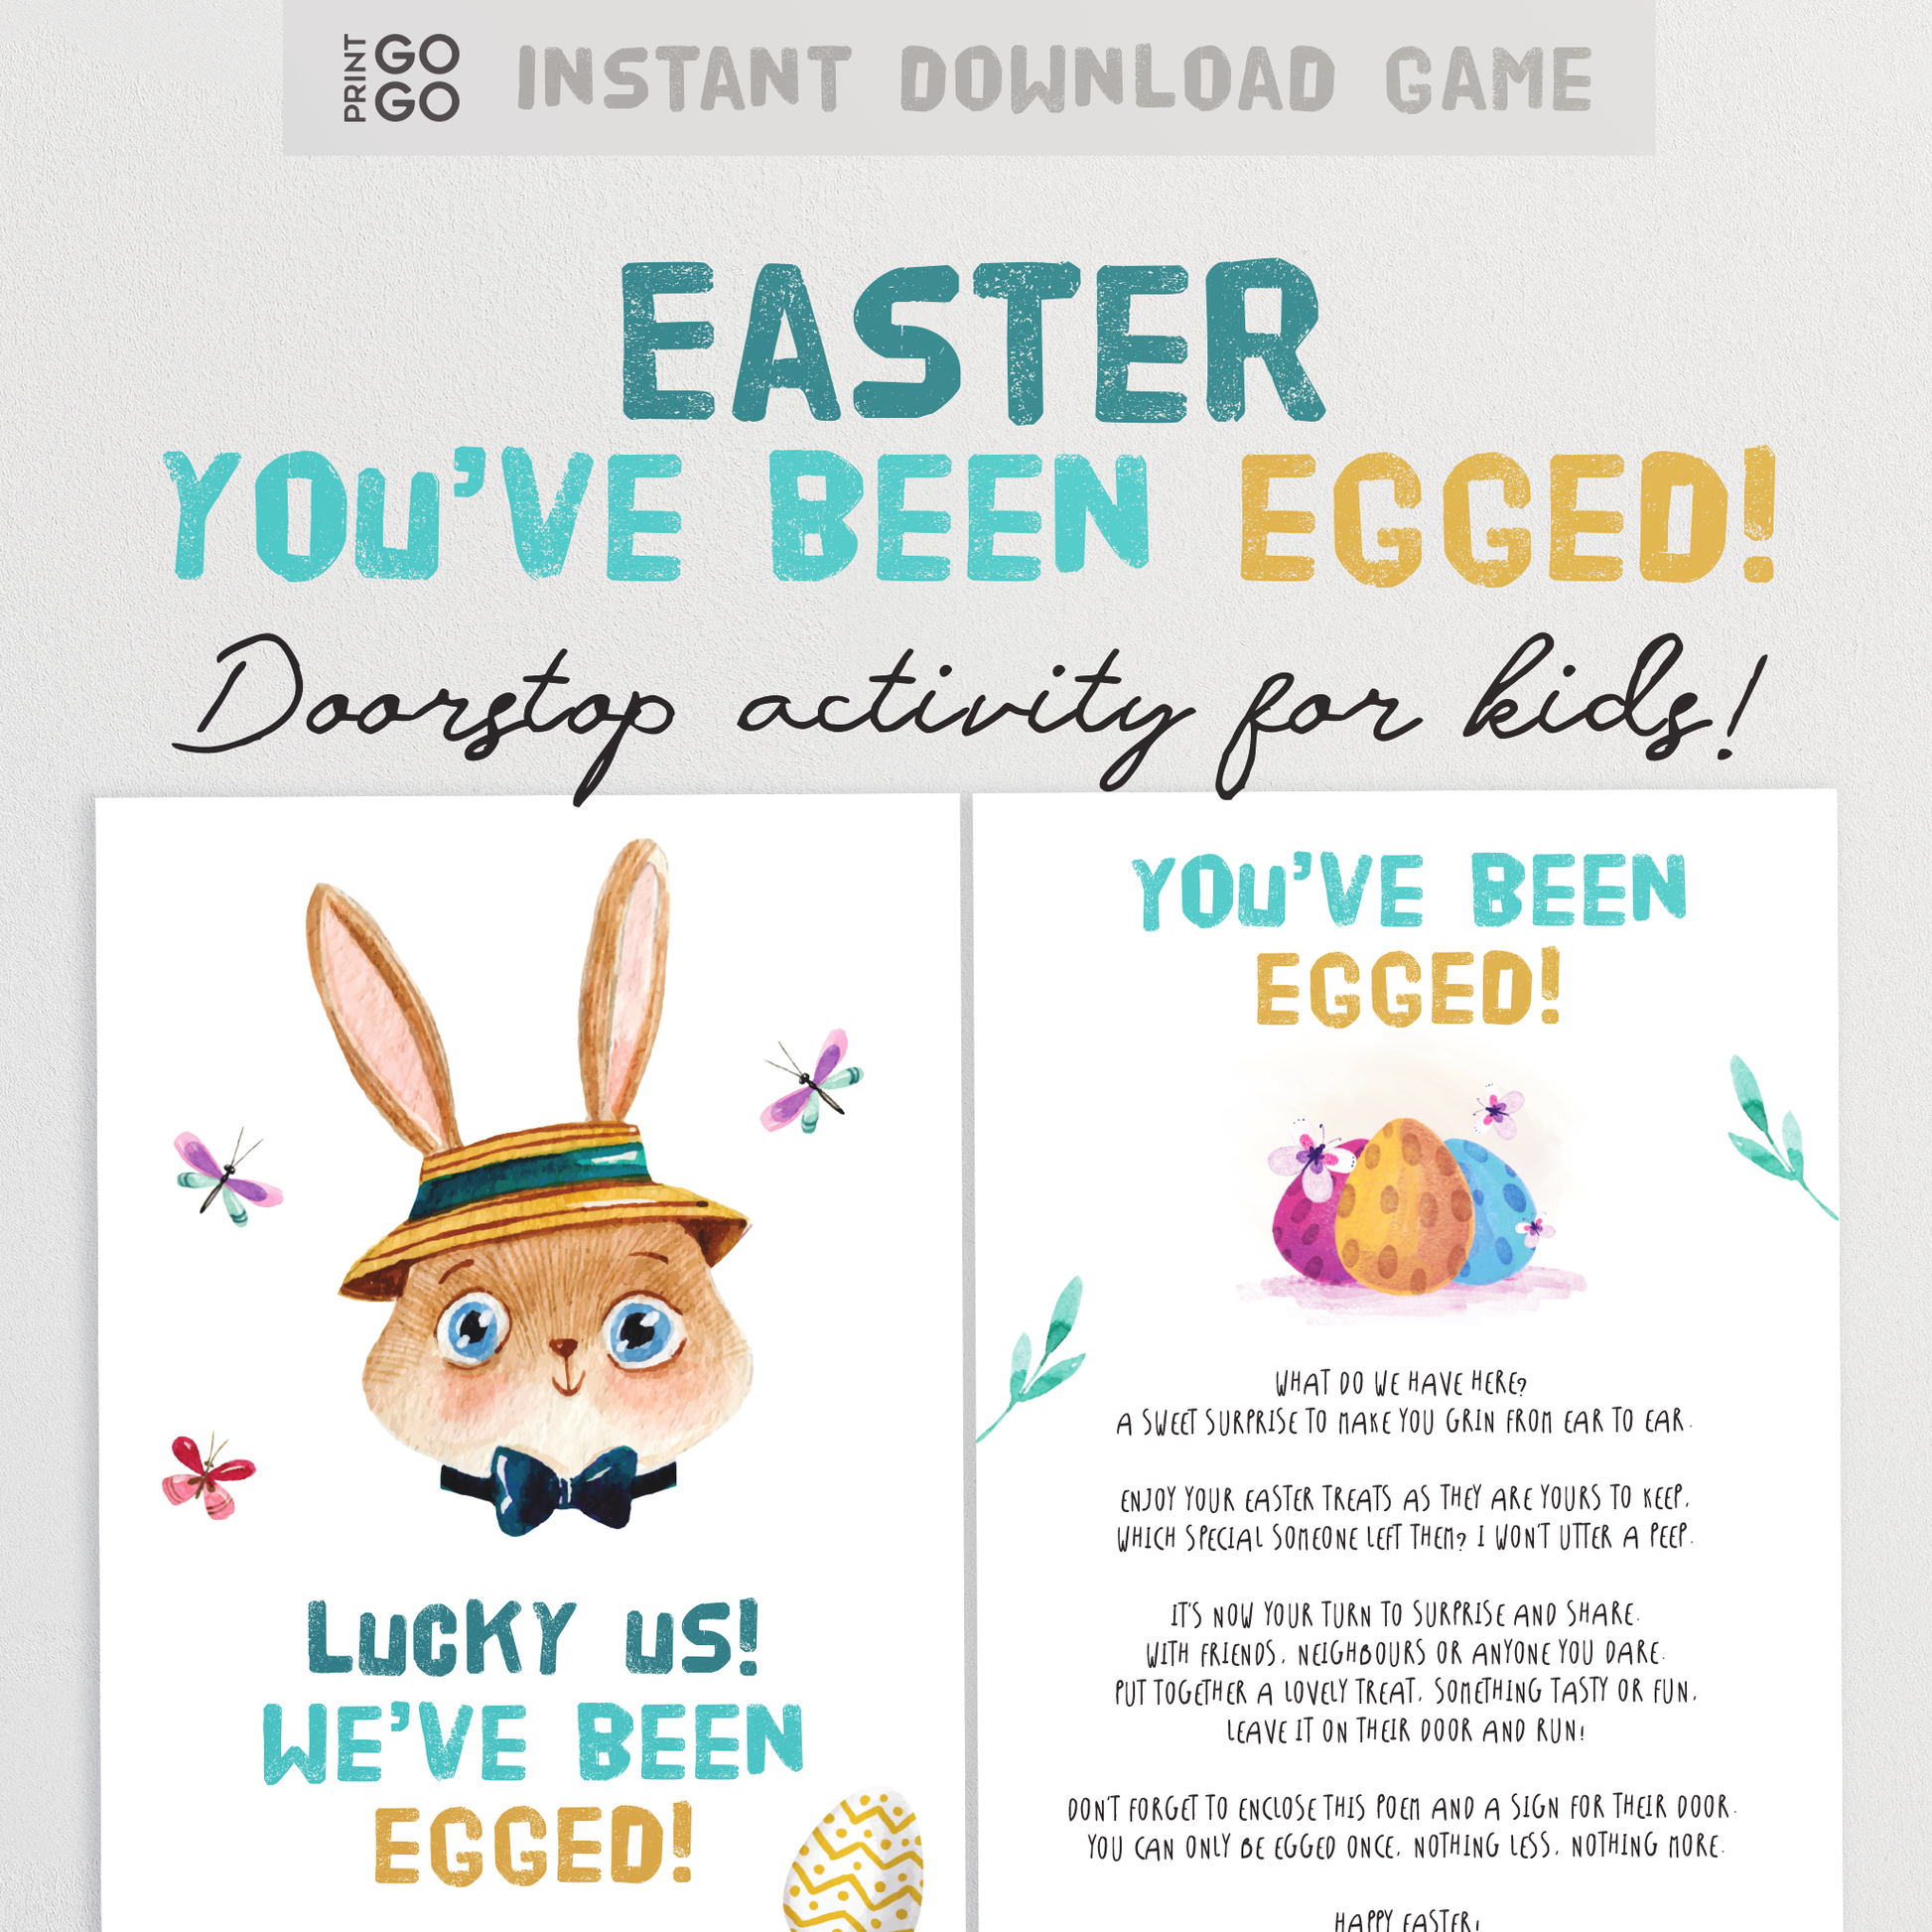 Easter You've Been Egged - A Fun Doorstep Activity for Kids